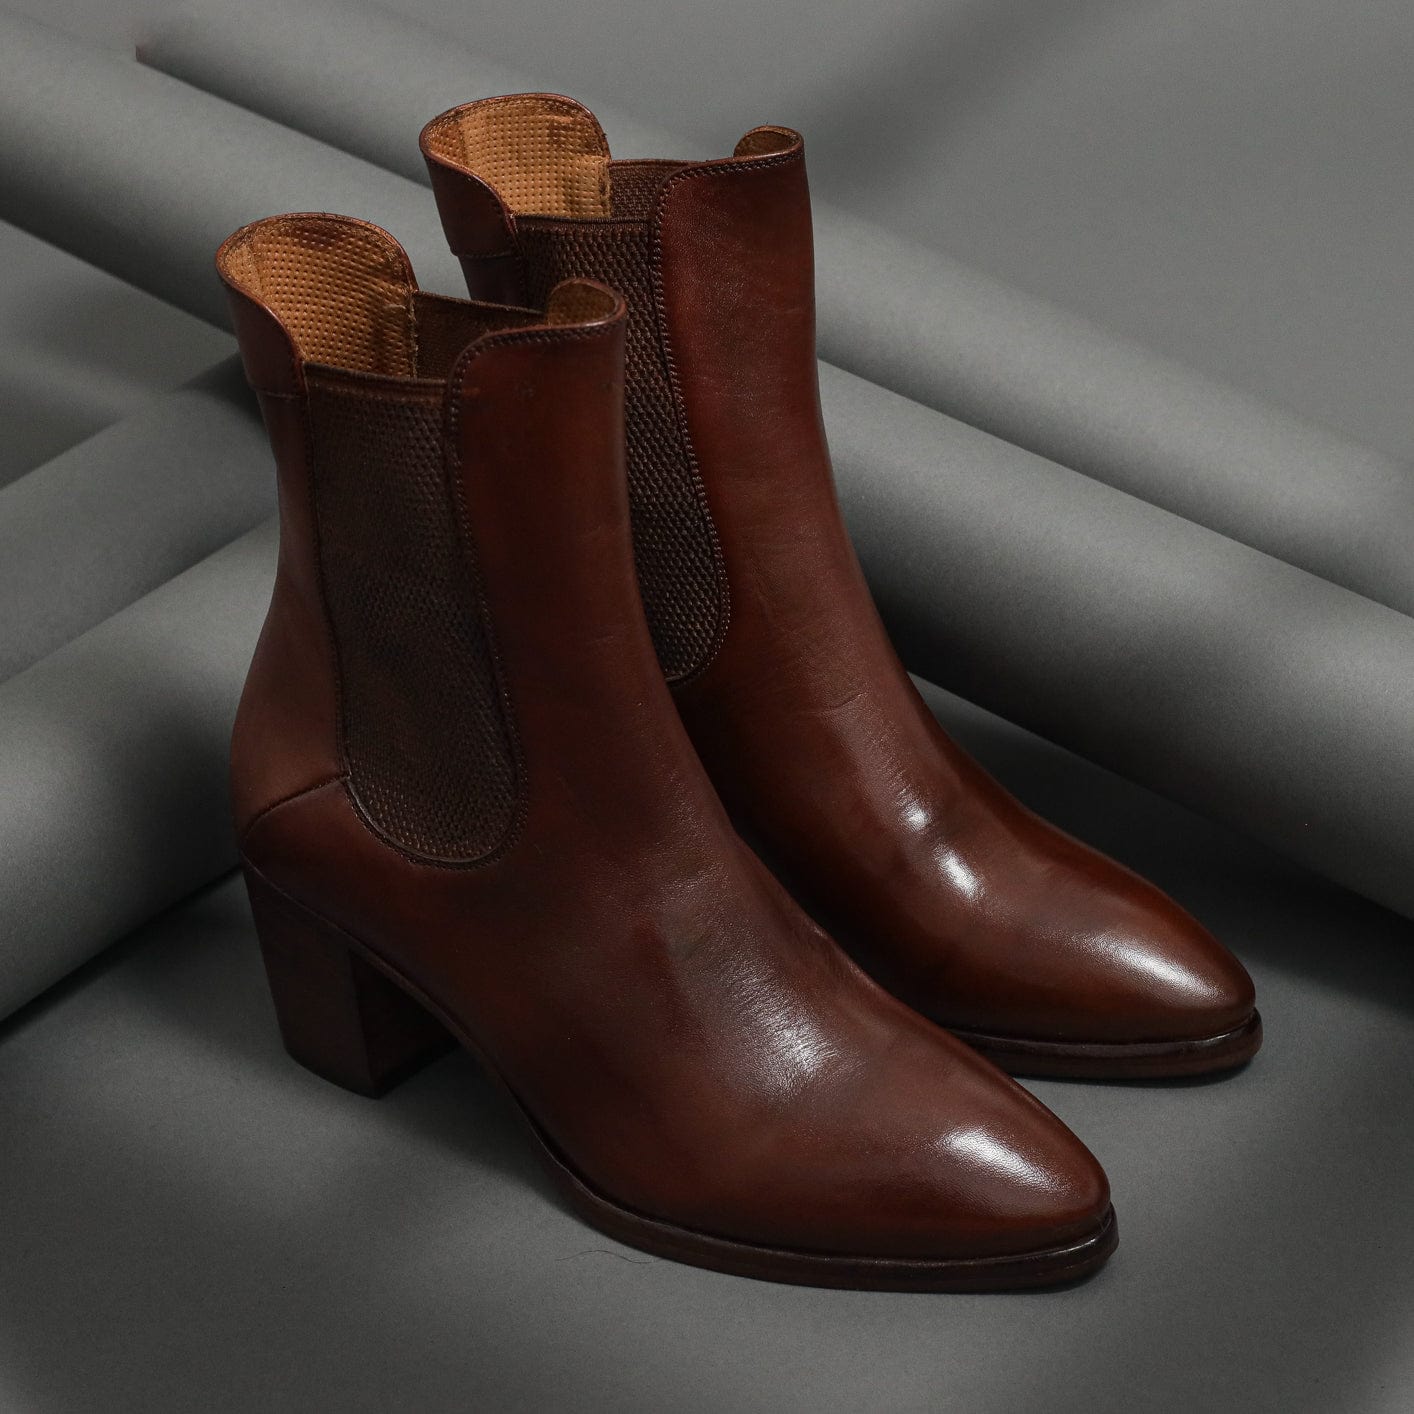 Conflict For Interest Womens Chelsea Boot Conflict For Interest 1252 Brown